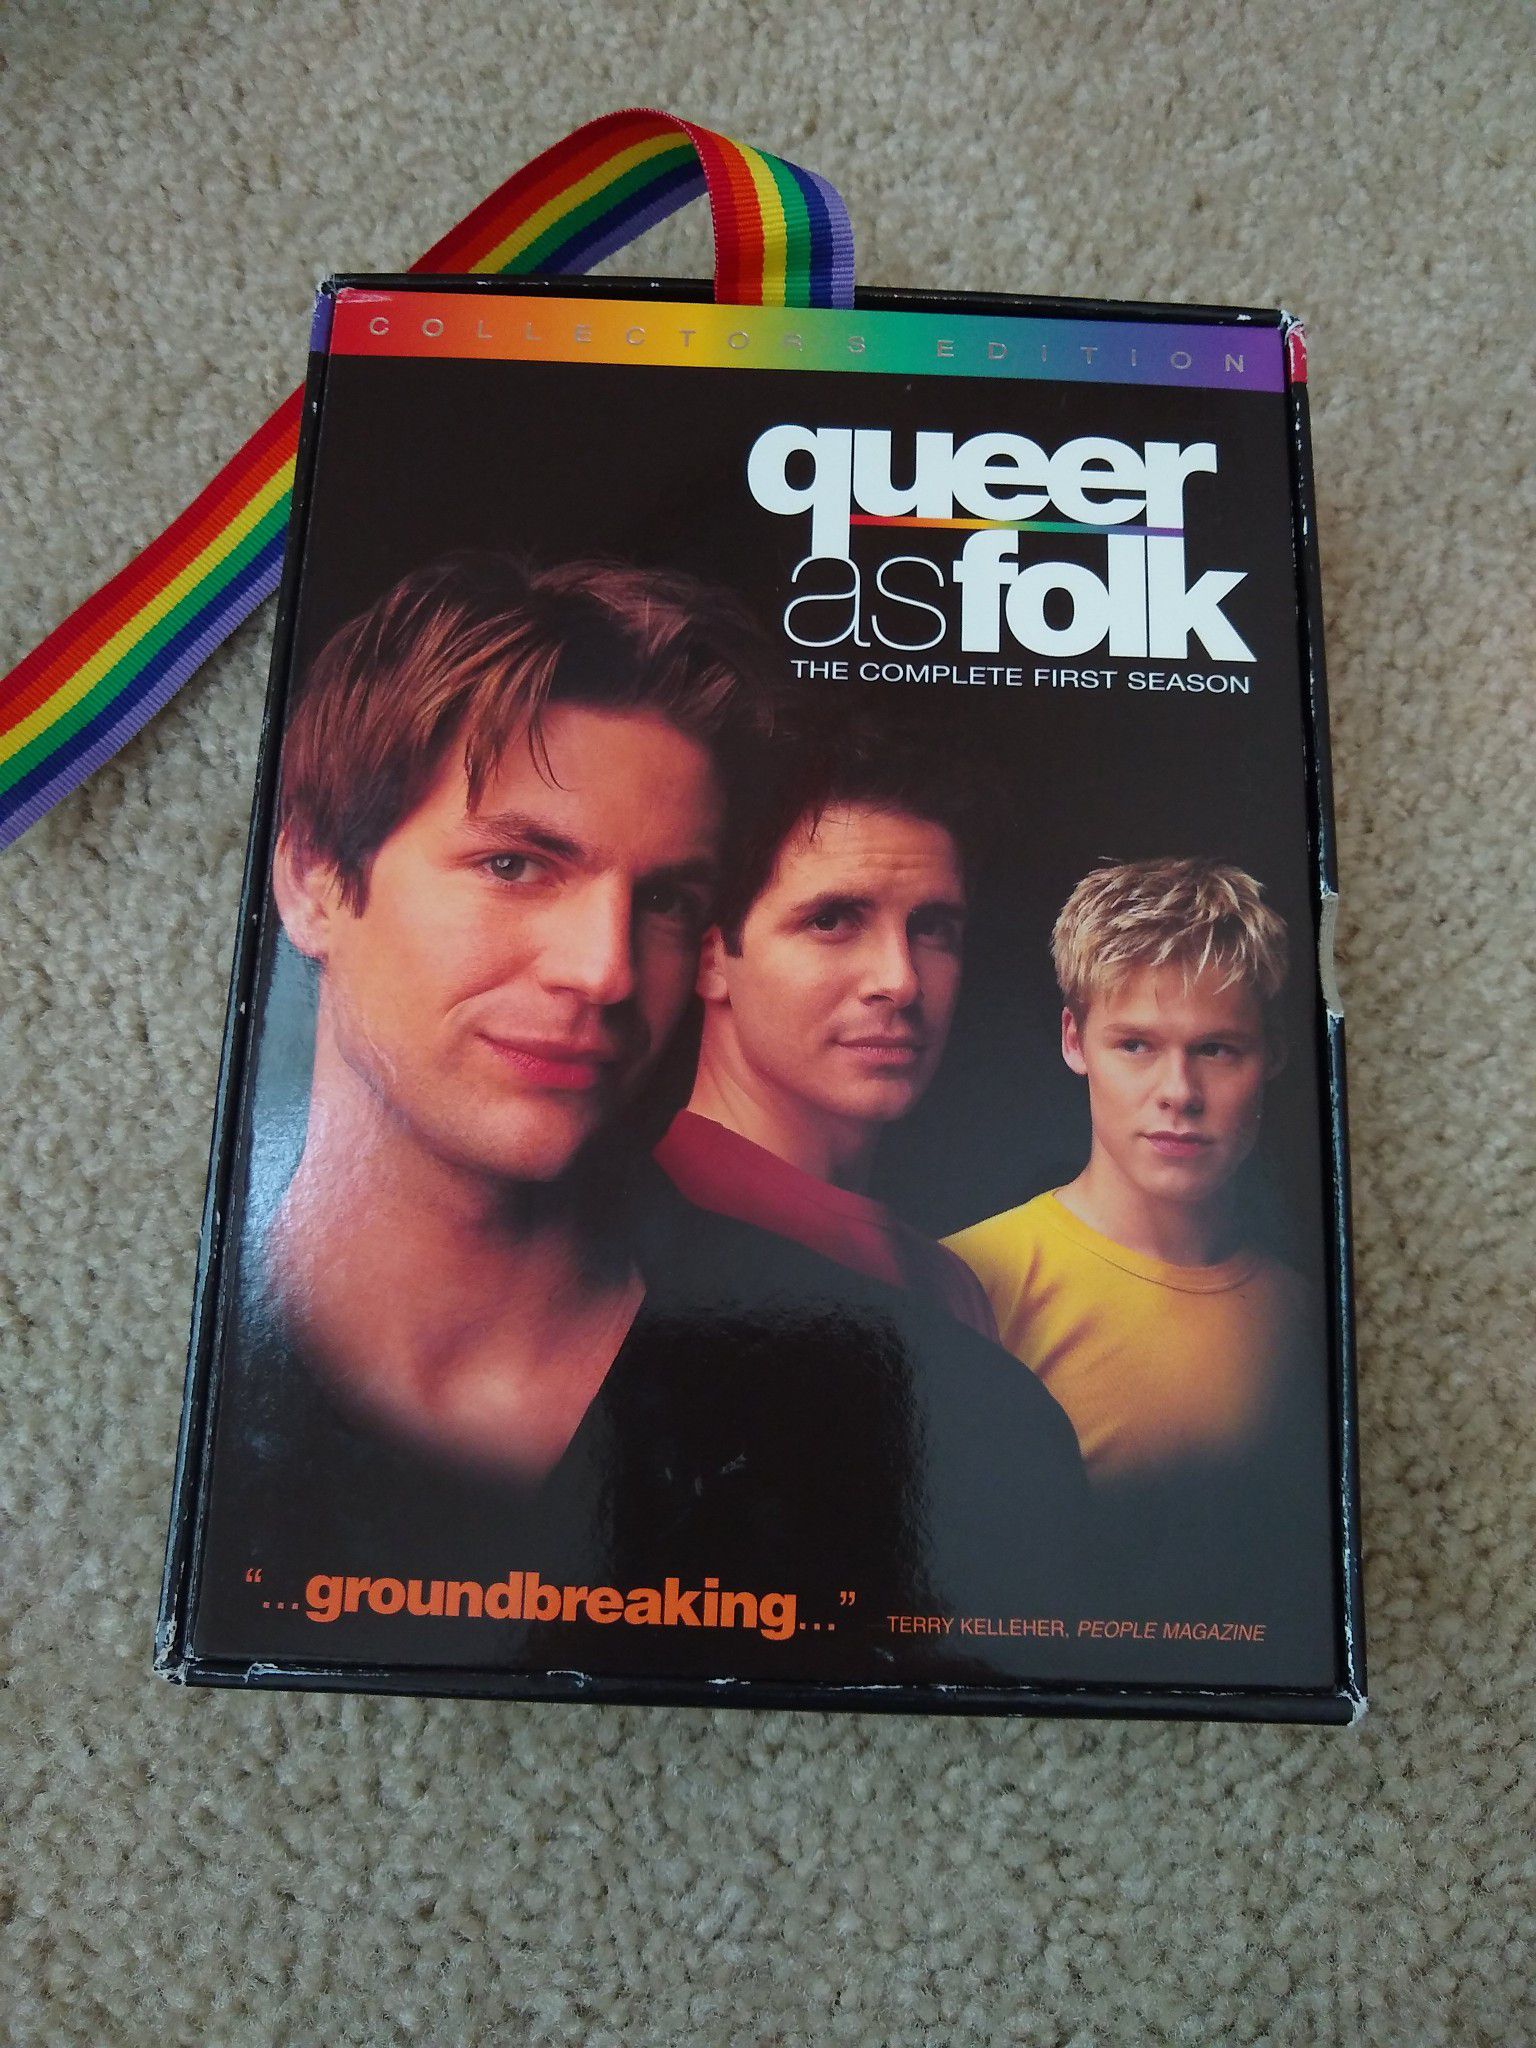 Queer as Folk - The Complete First Season (DVD, 2002, 6-Disc Set, Gift Box